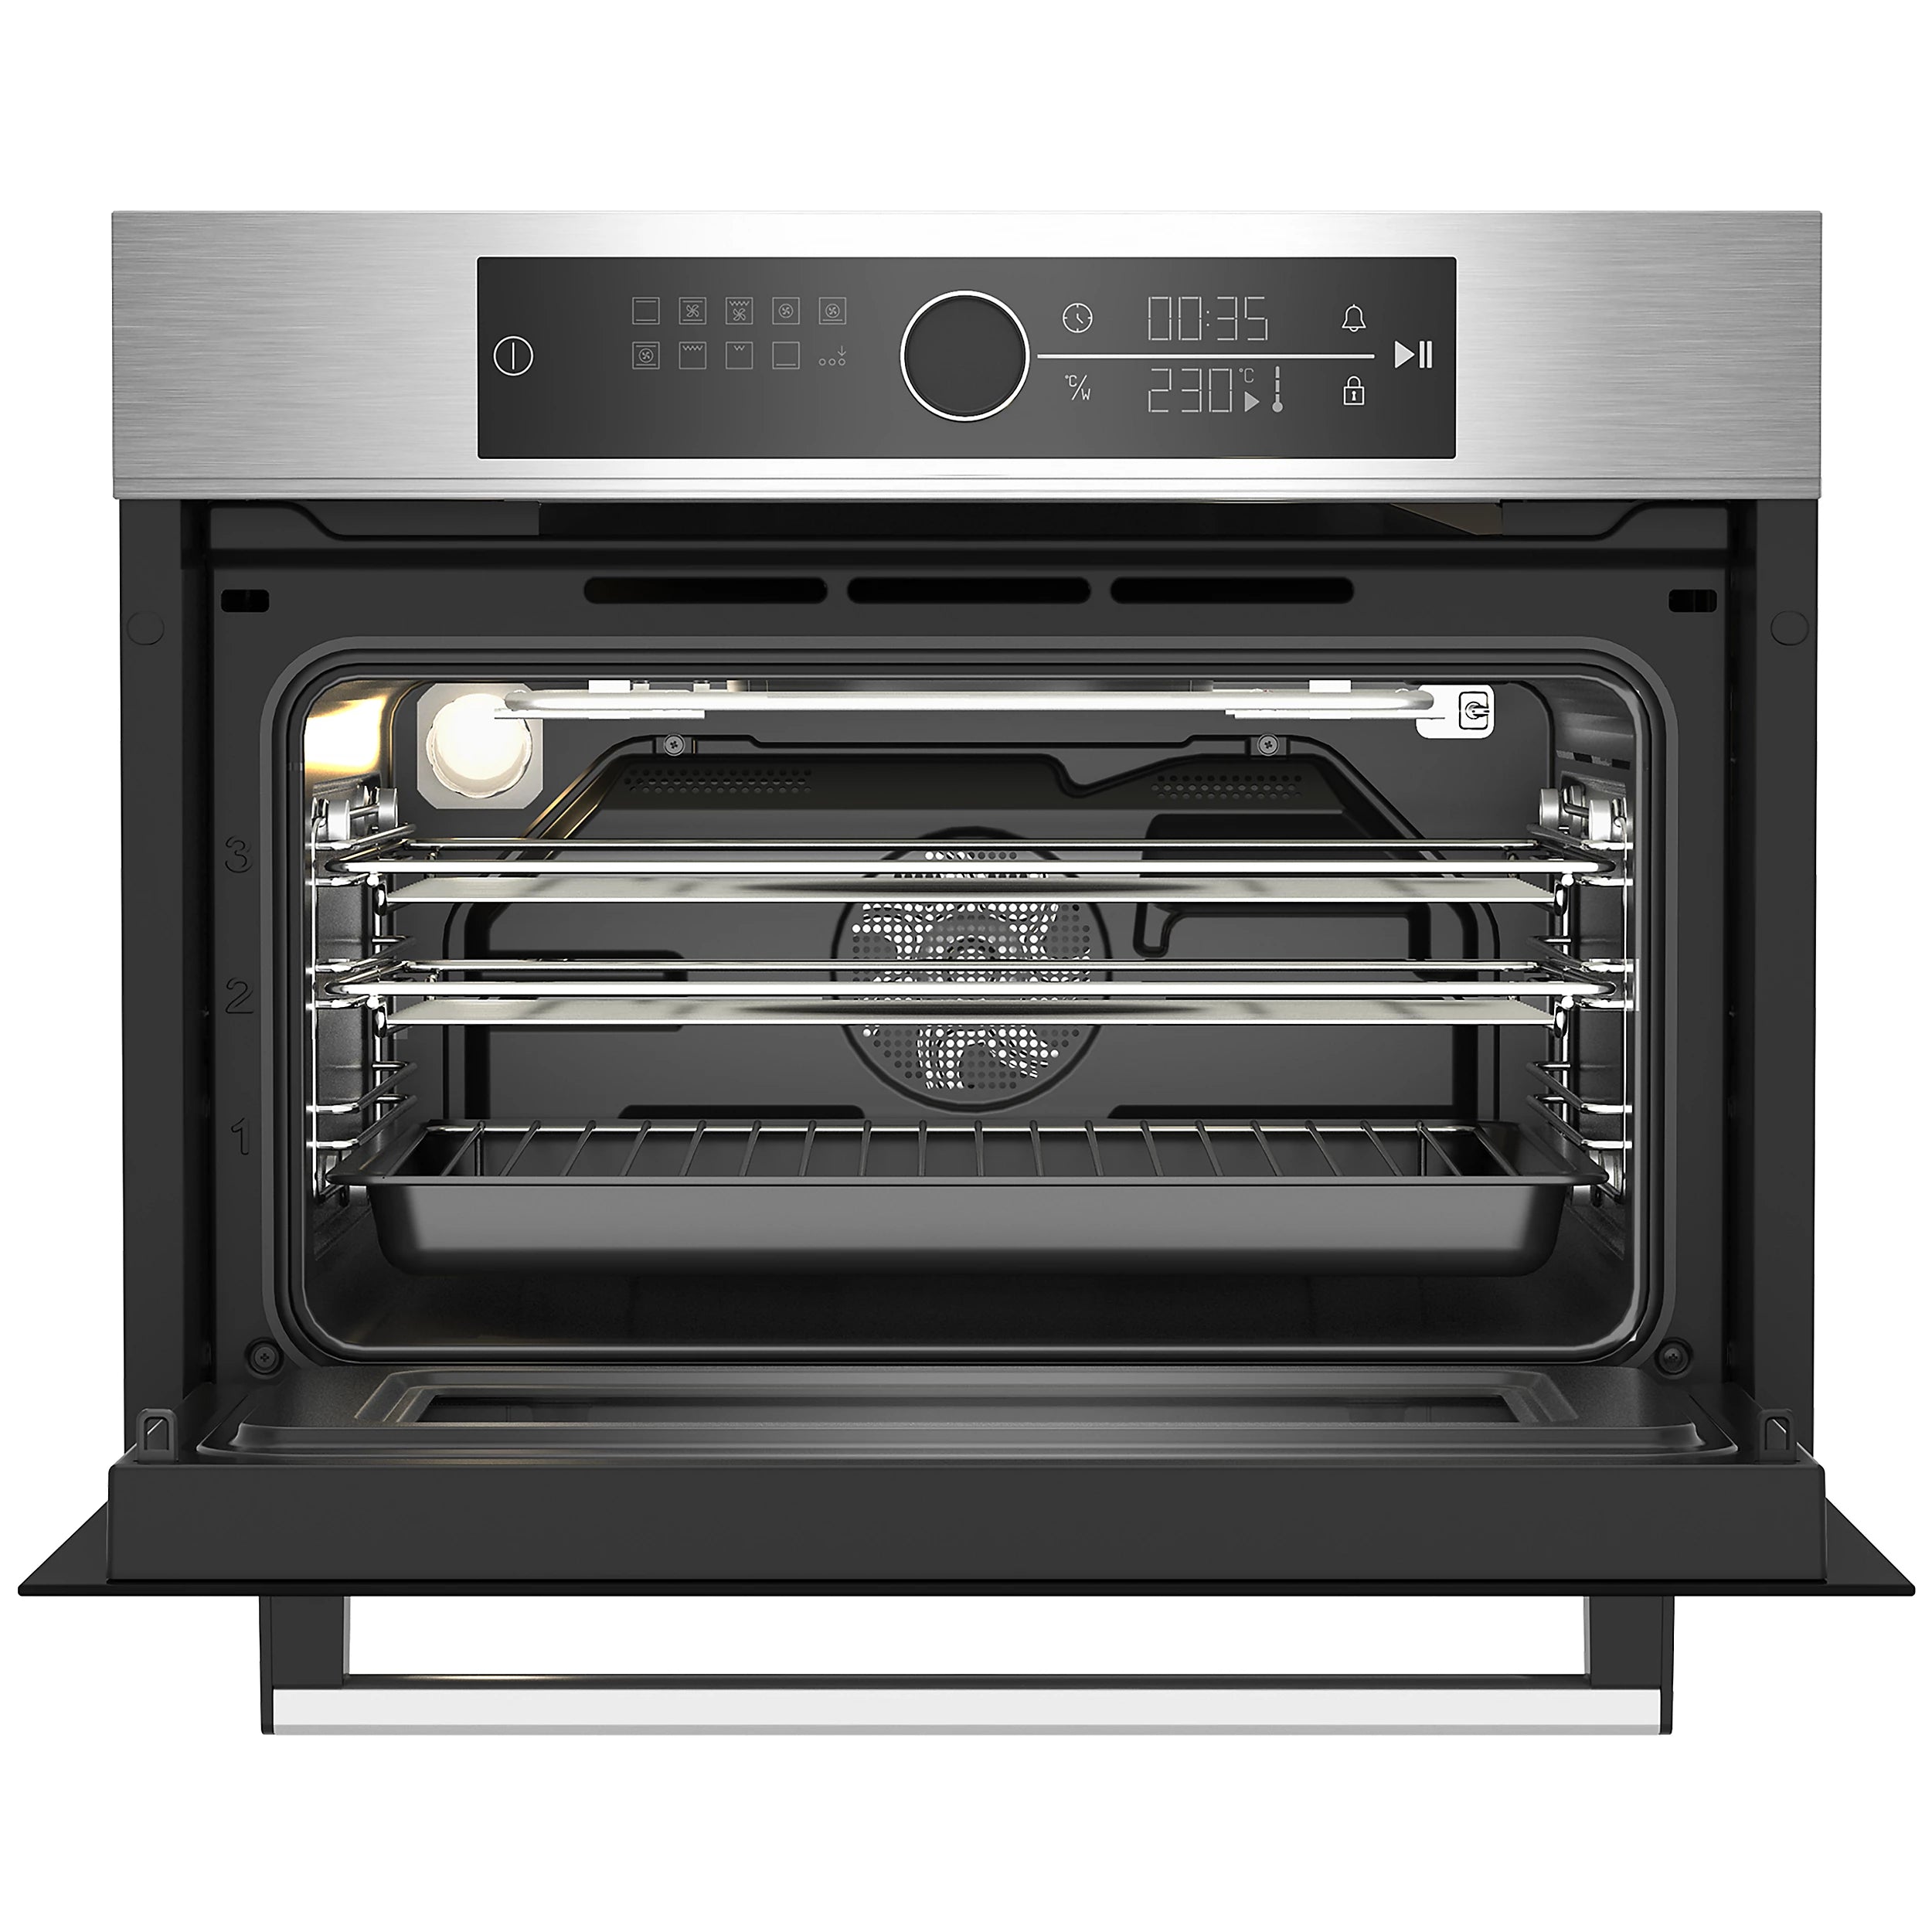 Beko BBCW12400X Built-in Oven with microwave - Stainless steel 6488